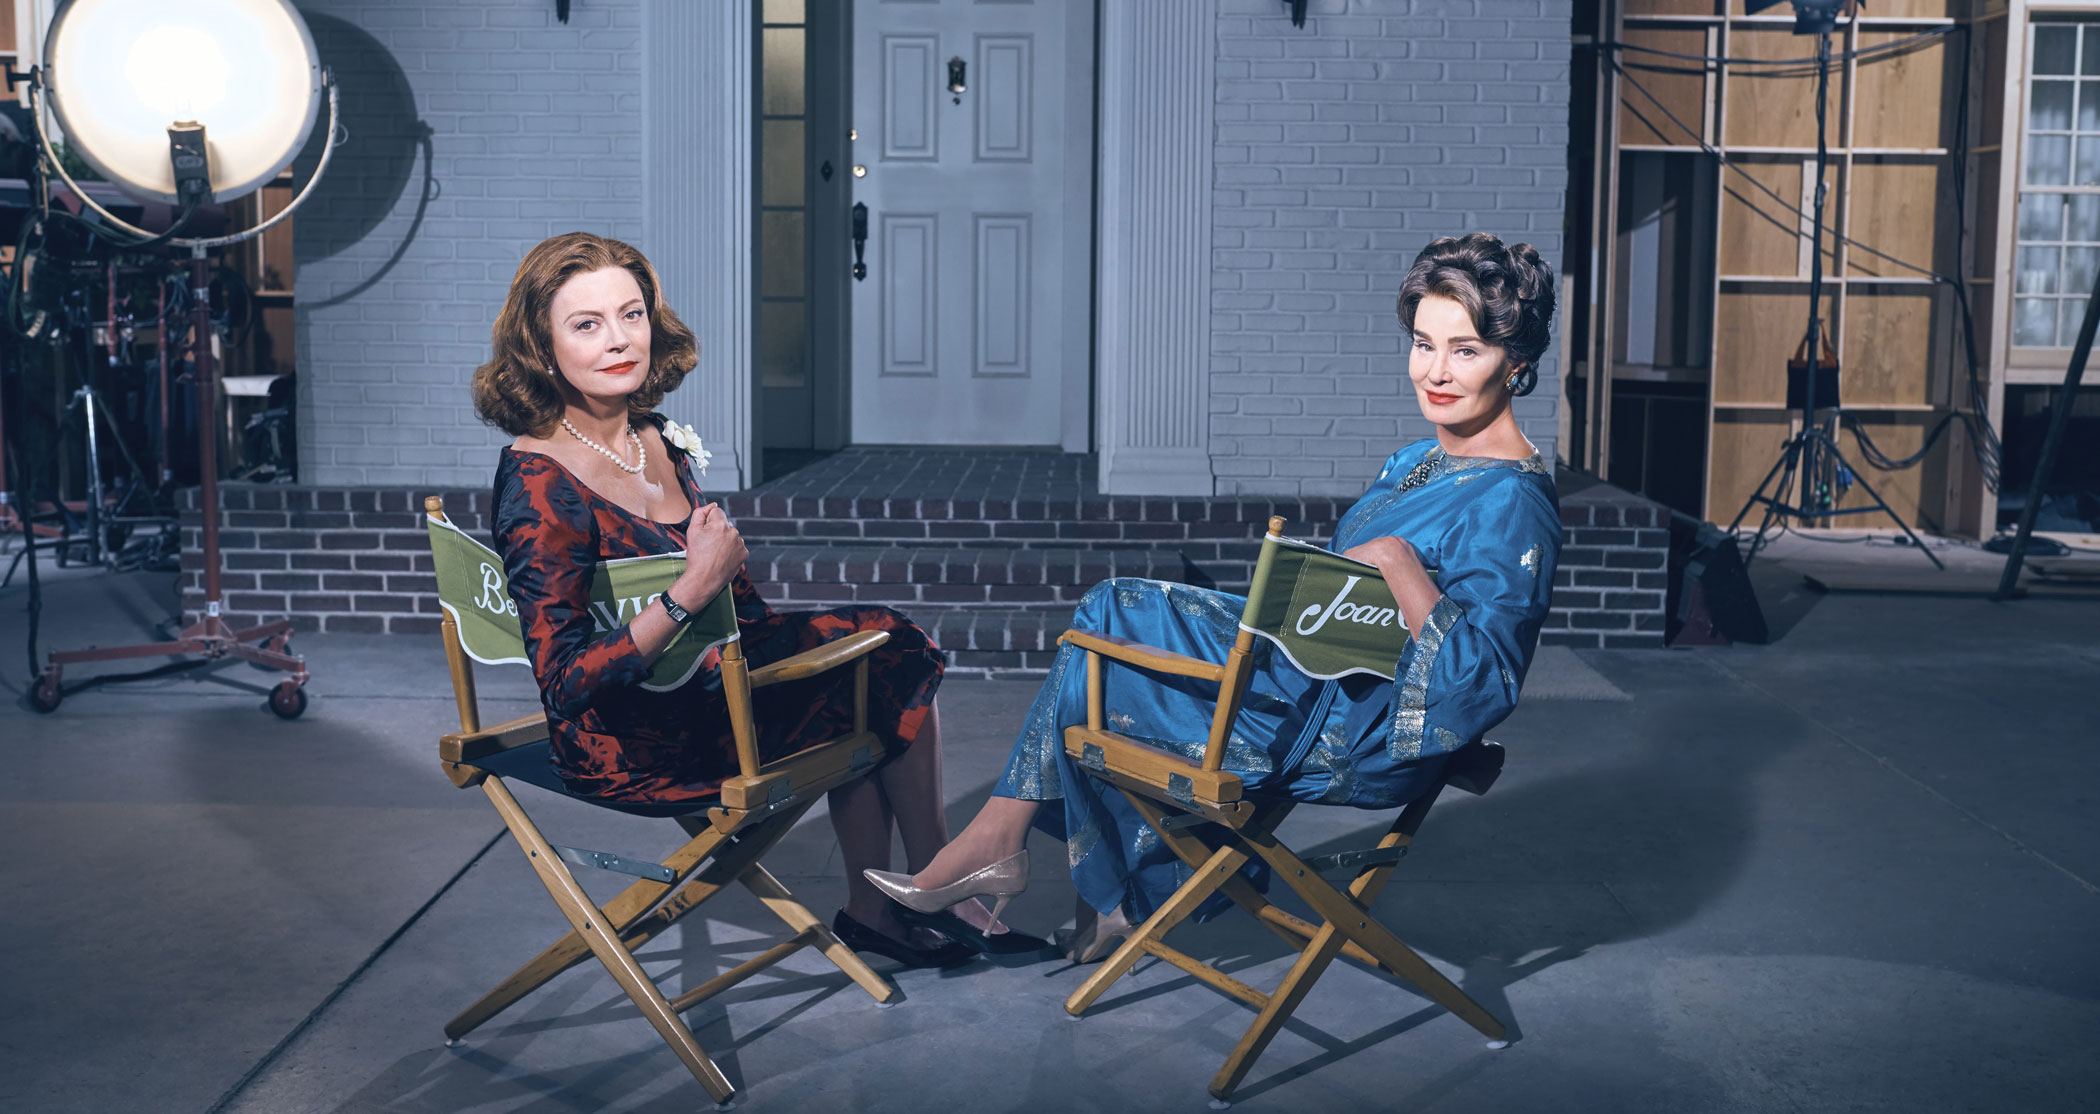 FEUD: Bette And Joan